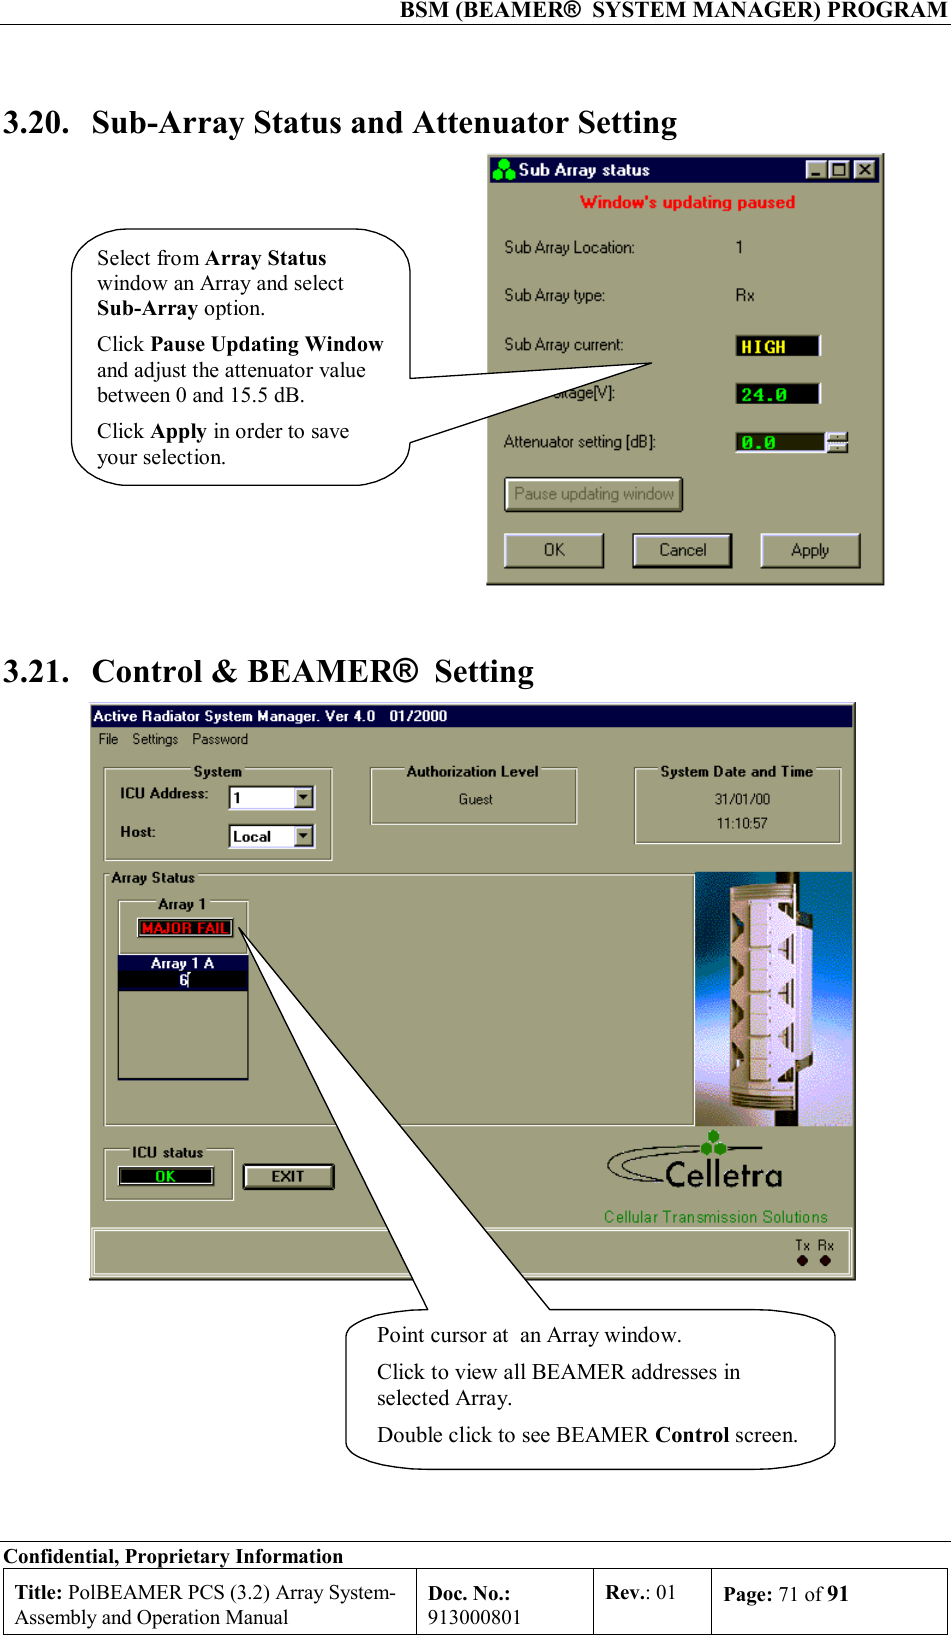  BSM (BEAMER®  SYSTEM MANAGER) PROGRAM Confidential, Proprietary Information Title: PolBEAMER PCS (3.2) Array System- Assembly and Operation Manual Doc. No.: 913000801 Rev.: 01  Page: 71 of 91  3.20.  Sub-Array Status and Attenuator Setting  Select from Array Statuswindow an Array and selectSub-Array option.Click Pause Updating Windowand adjust the attenuator valuebetween 0 and 15.5 dB.Click Apply in order to saveyour selection. 3.21.  Control &amp; BEAMER®  Setting Point cursor at  an Array window.Click to view all BEAMER addresses inselected Array.Double click to see BEAMER Control screen. 